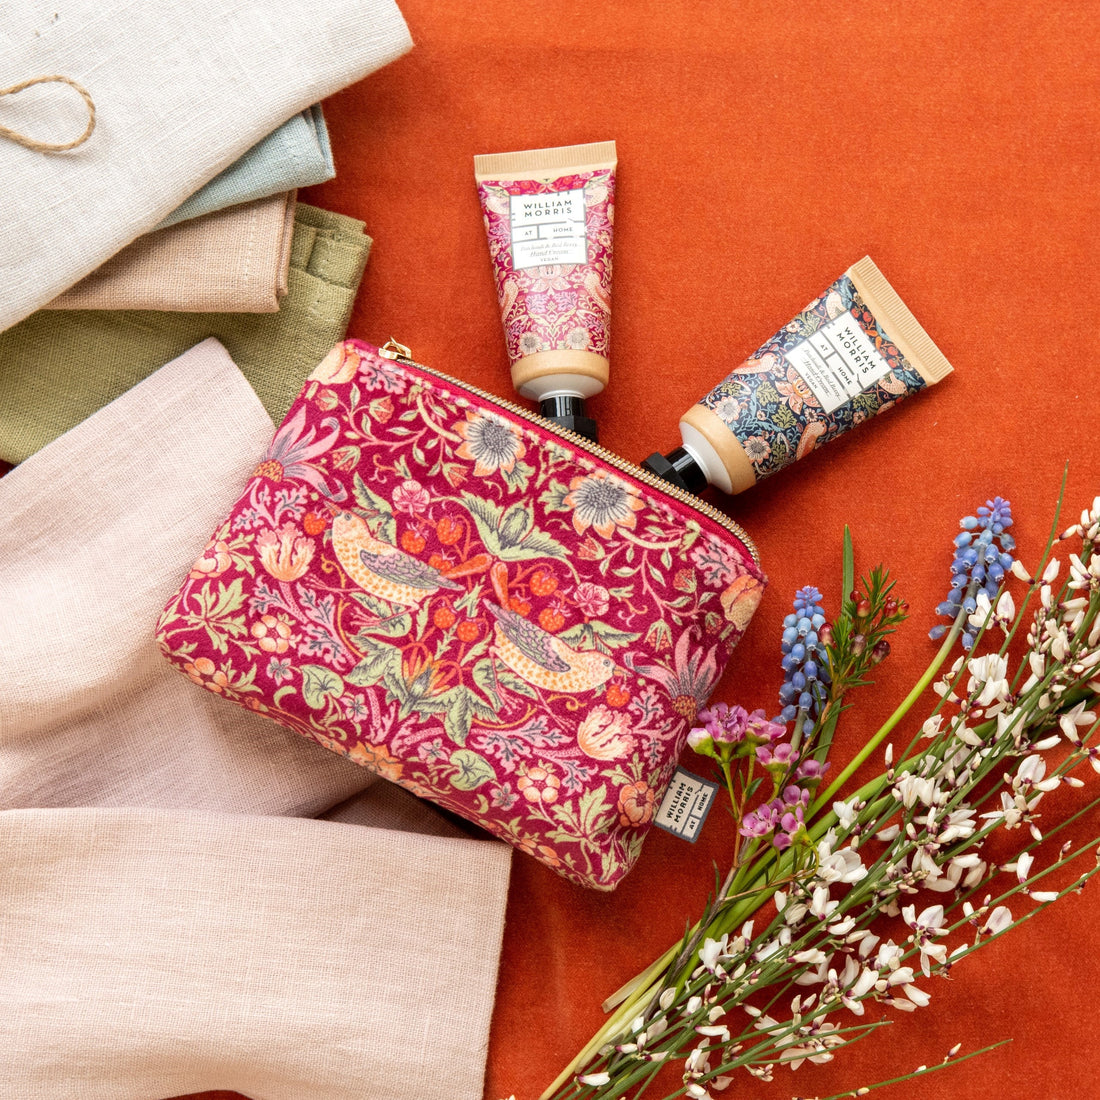 Strawberry Thief Patchouli & Red Berry Hand Care Bag Set Lifestyle Shot